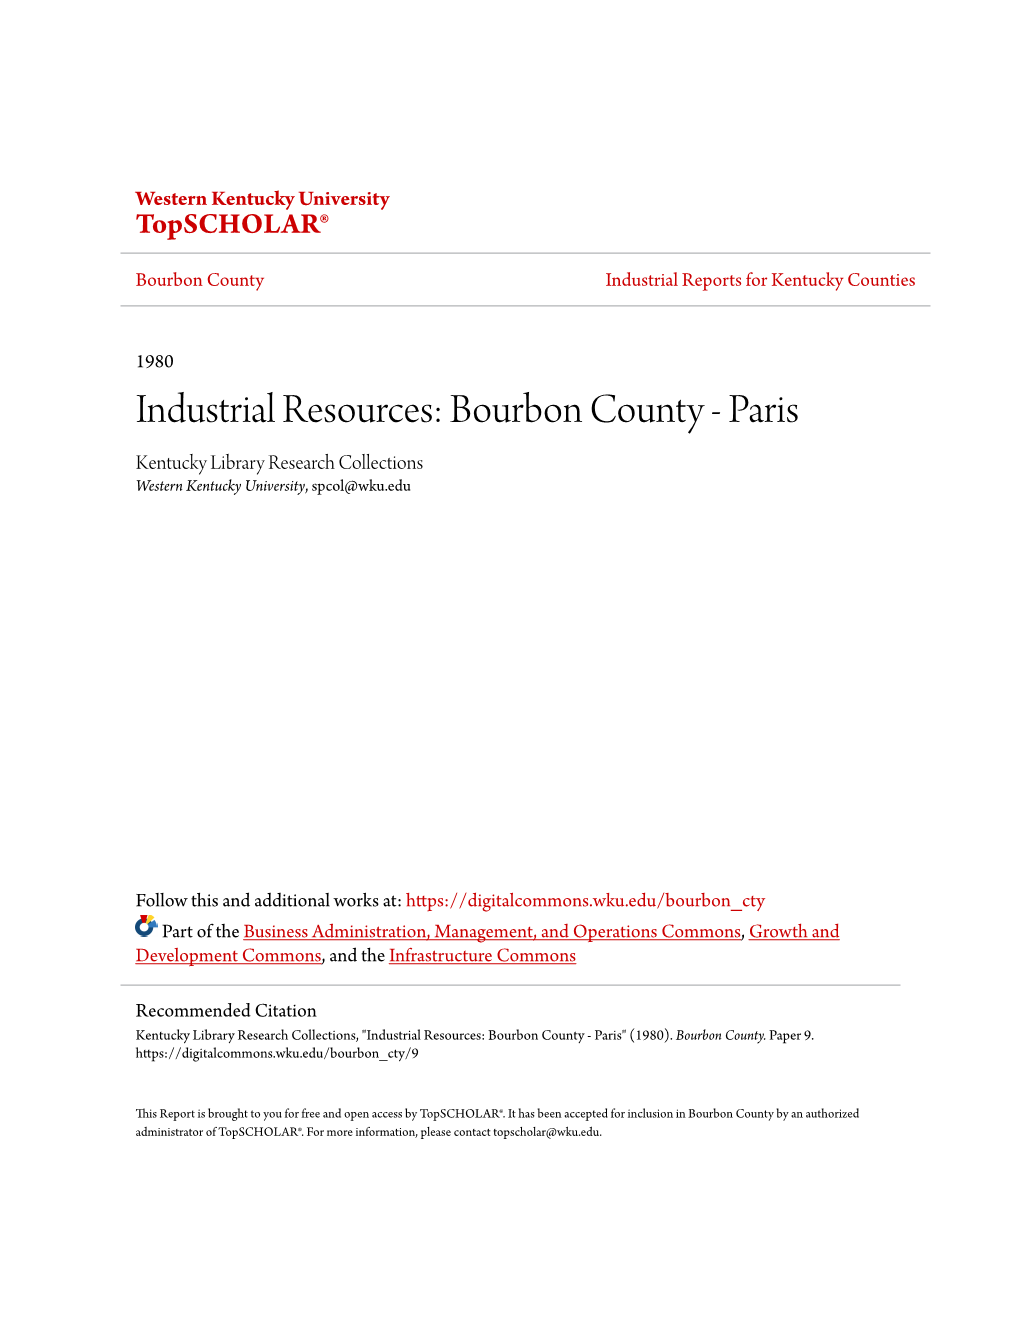 Bourbon County Industrial Reports for Kentucky Counties